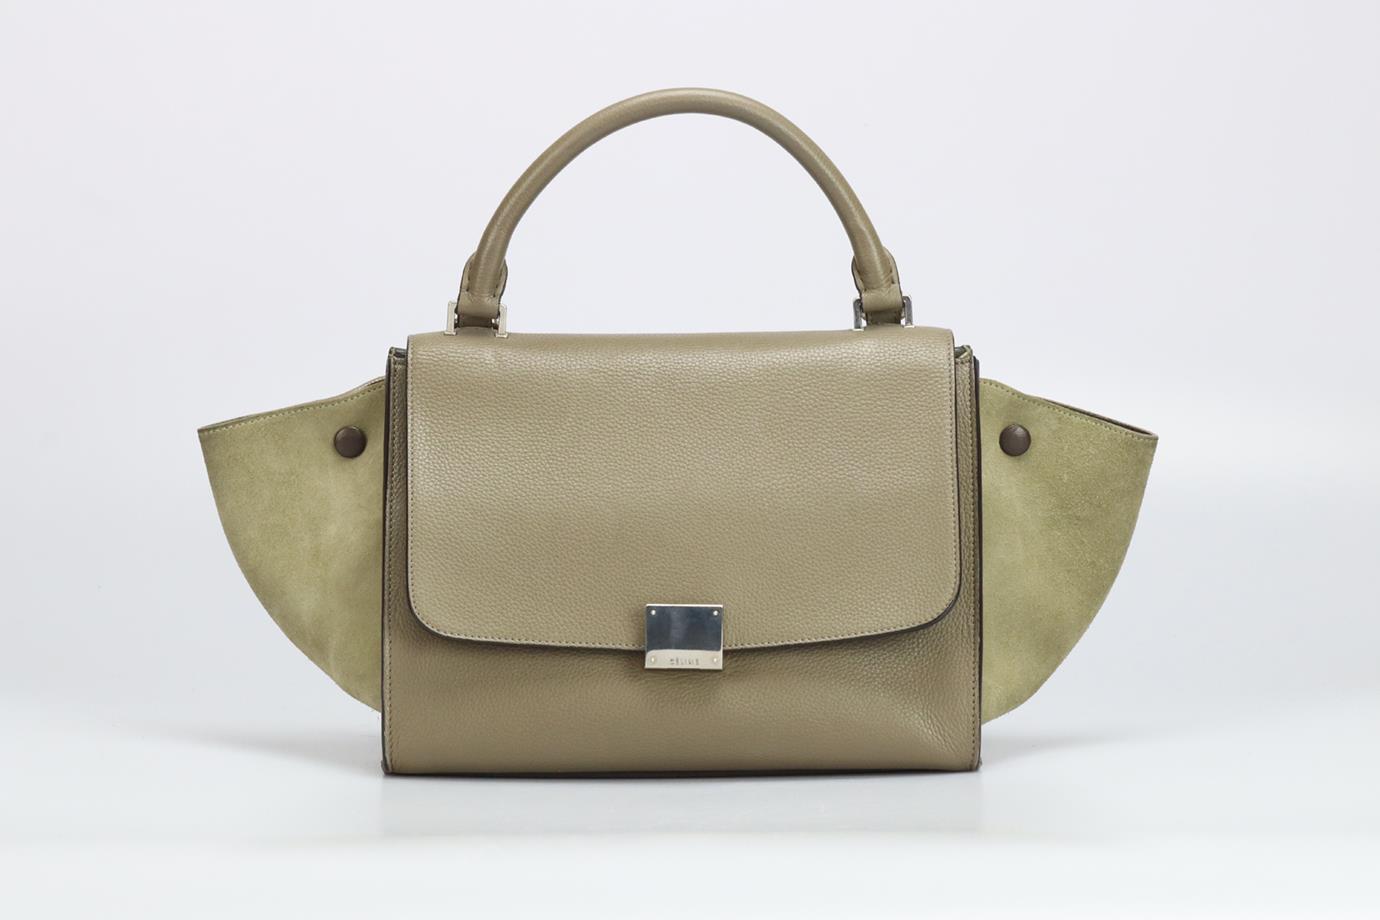 CELINE TRAPEZE SMALL SUEDE AND LEATHER TOTE BAG